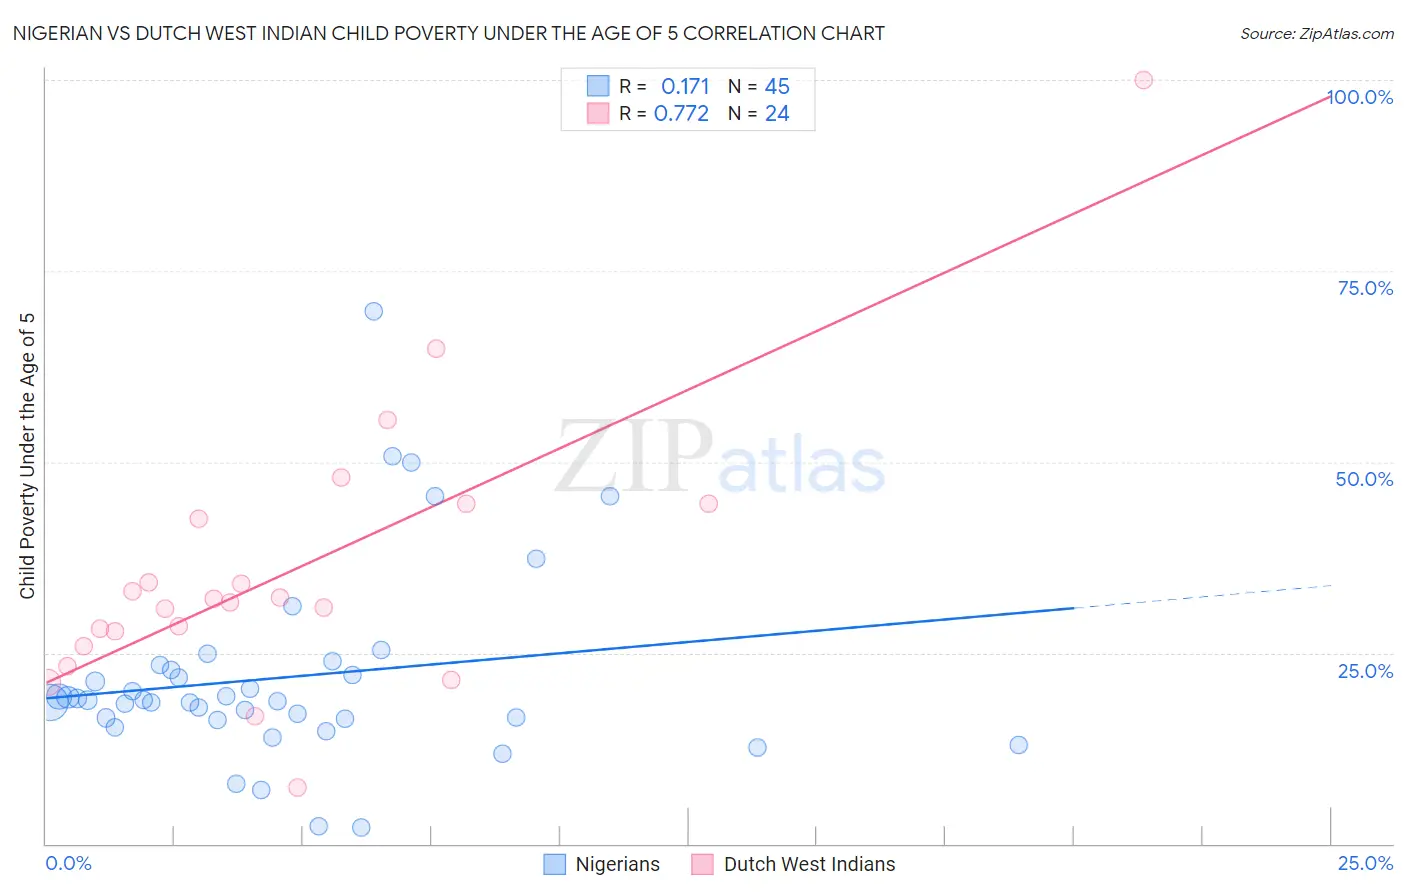 Nigerian vs Dutch West Indian Child Poverty Under the Age of 5